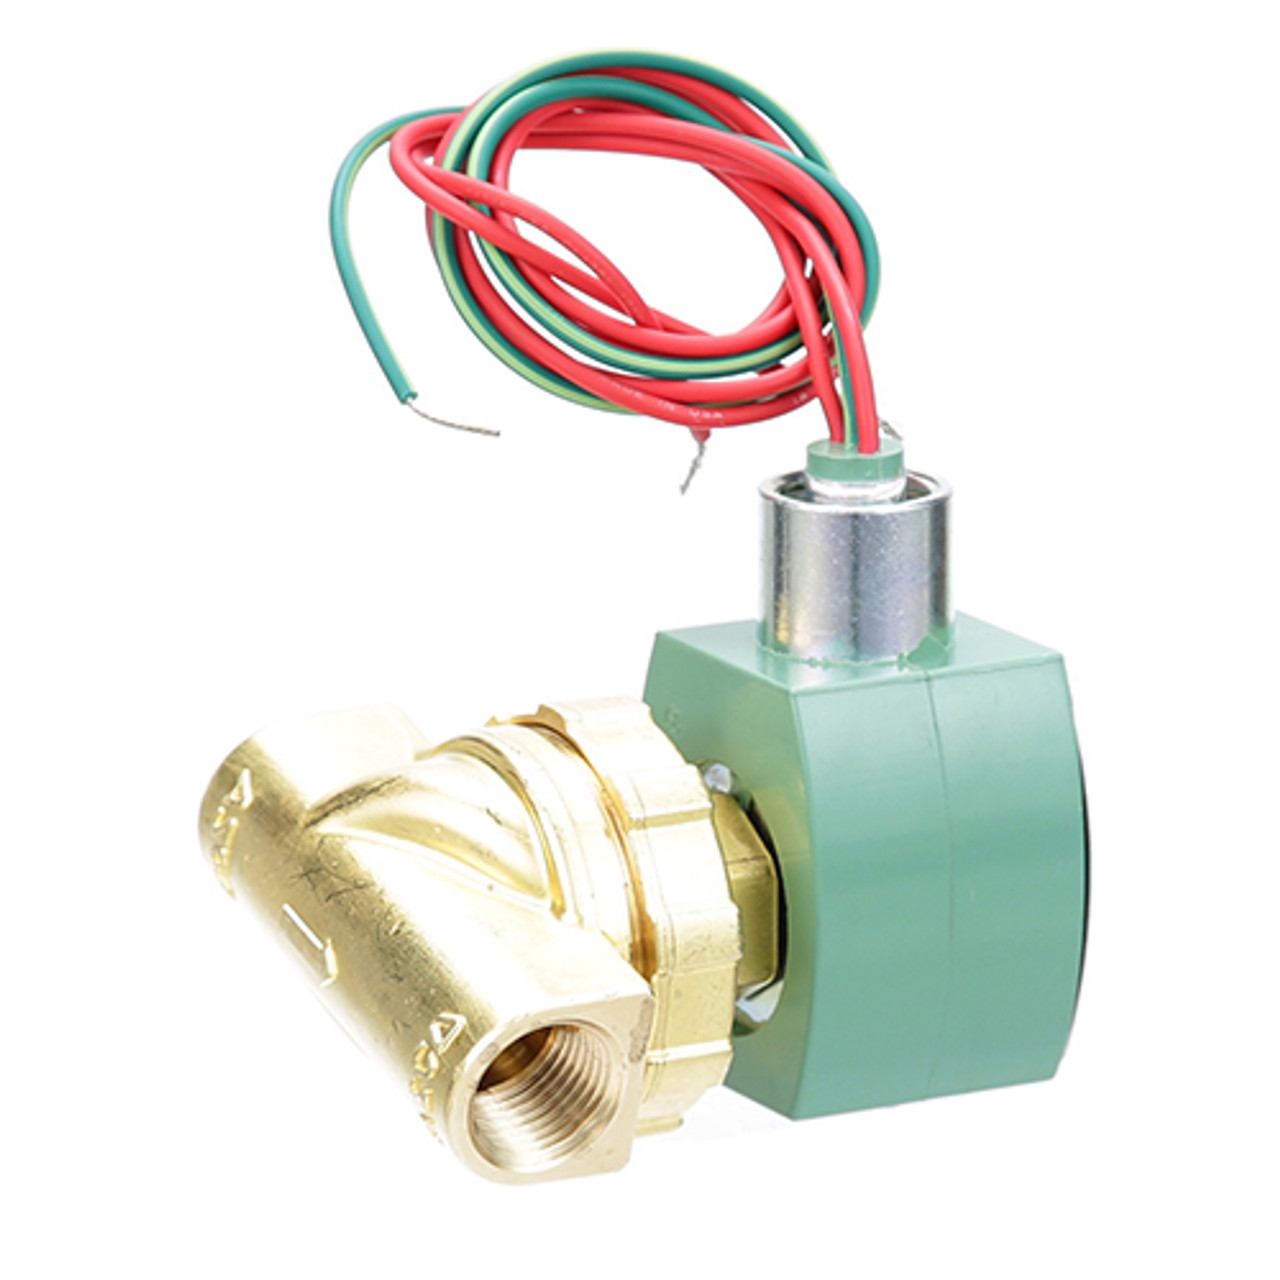 Solenoid Valve , 110/120V 50/60Hz - Replacement Part For Southbend 92731